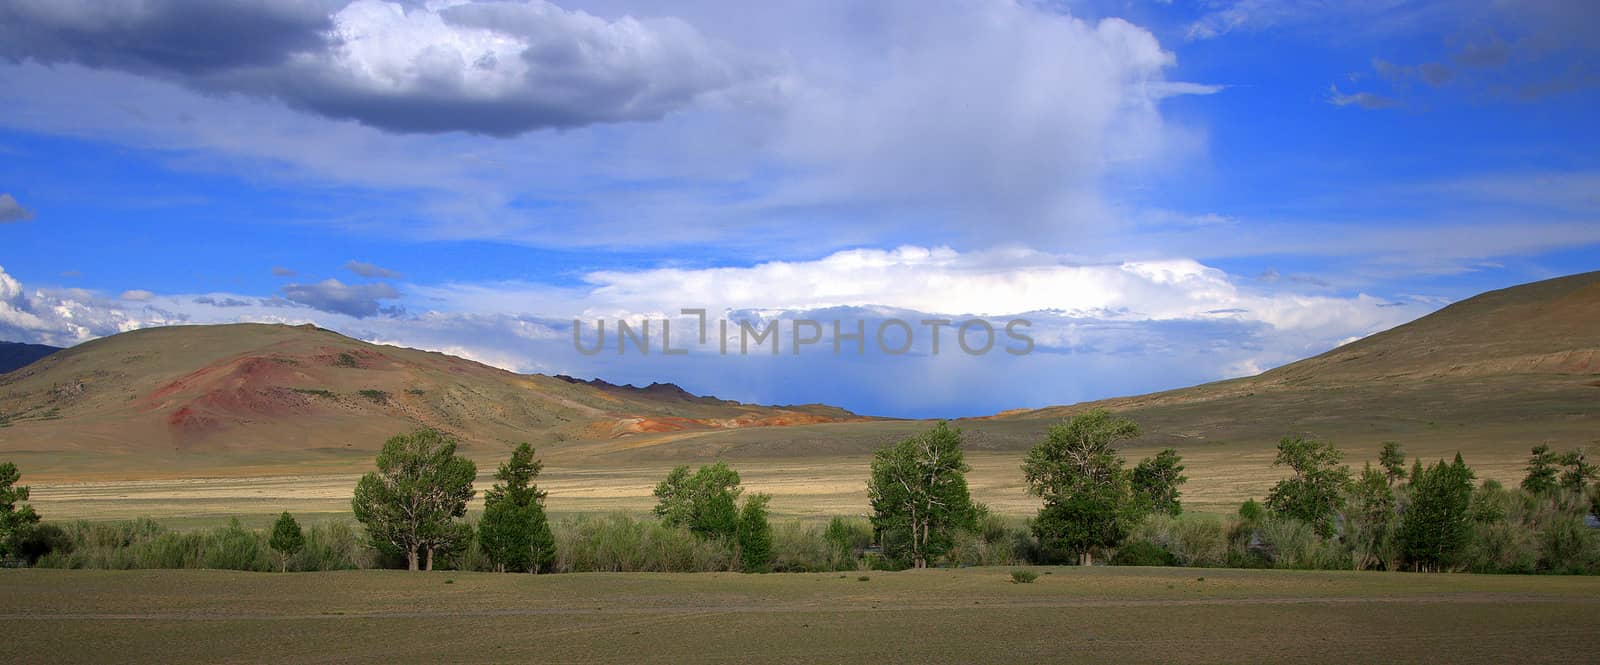 Panoramic shot of red mountains under a blue cloudy sky and sparse bushes at the foot. by alexey_zheltukhin